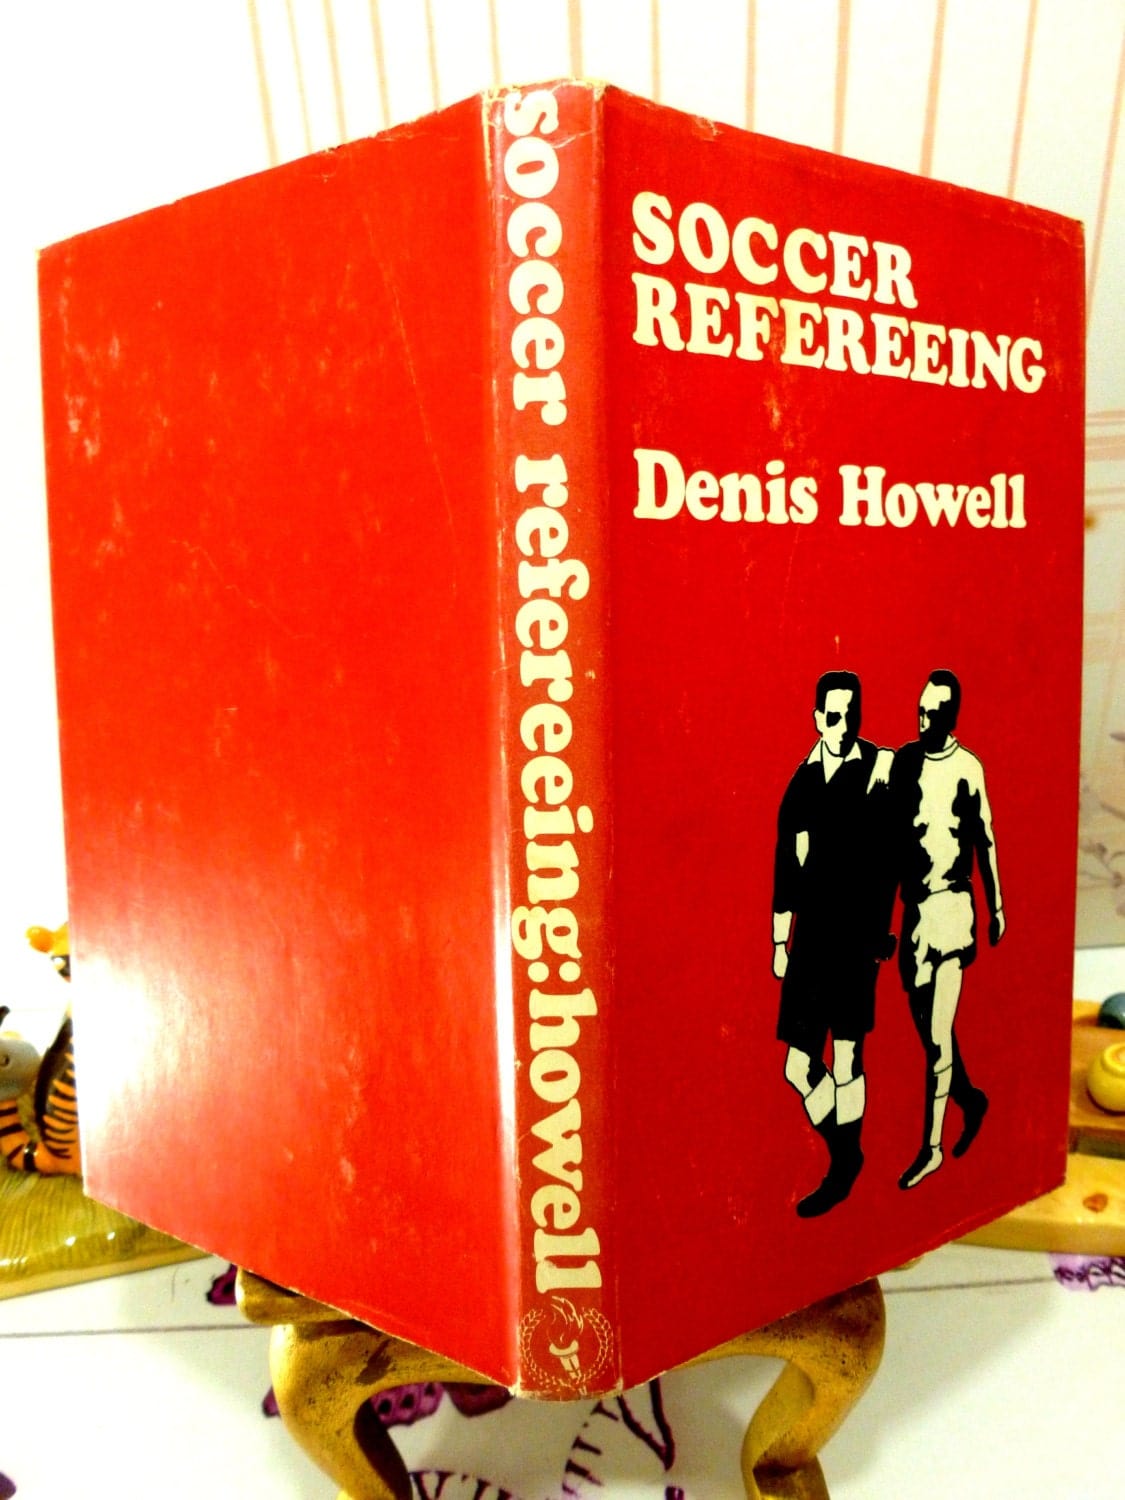 Soccer Refereeing, How to Referee Guide Handbook, Sportsmans Book Club 1st Edition 1960s Hardback with Dustcover